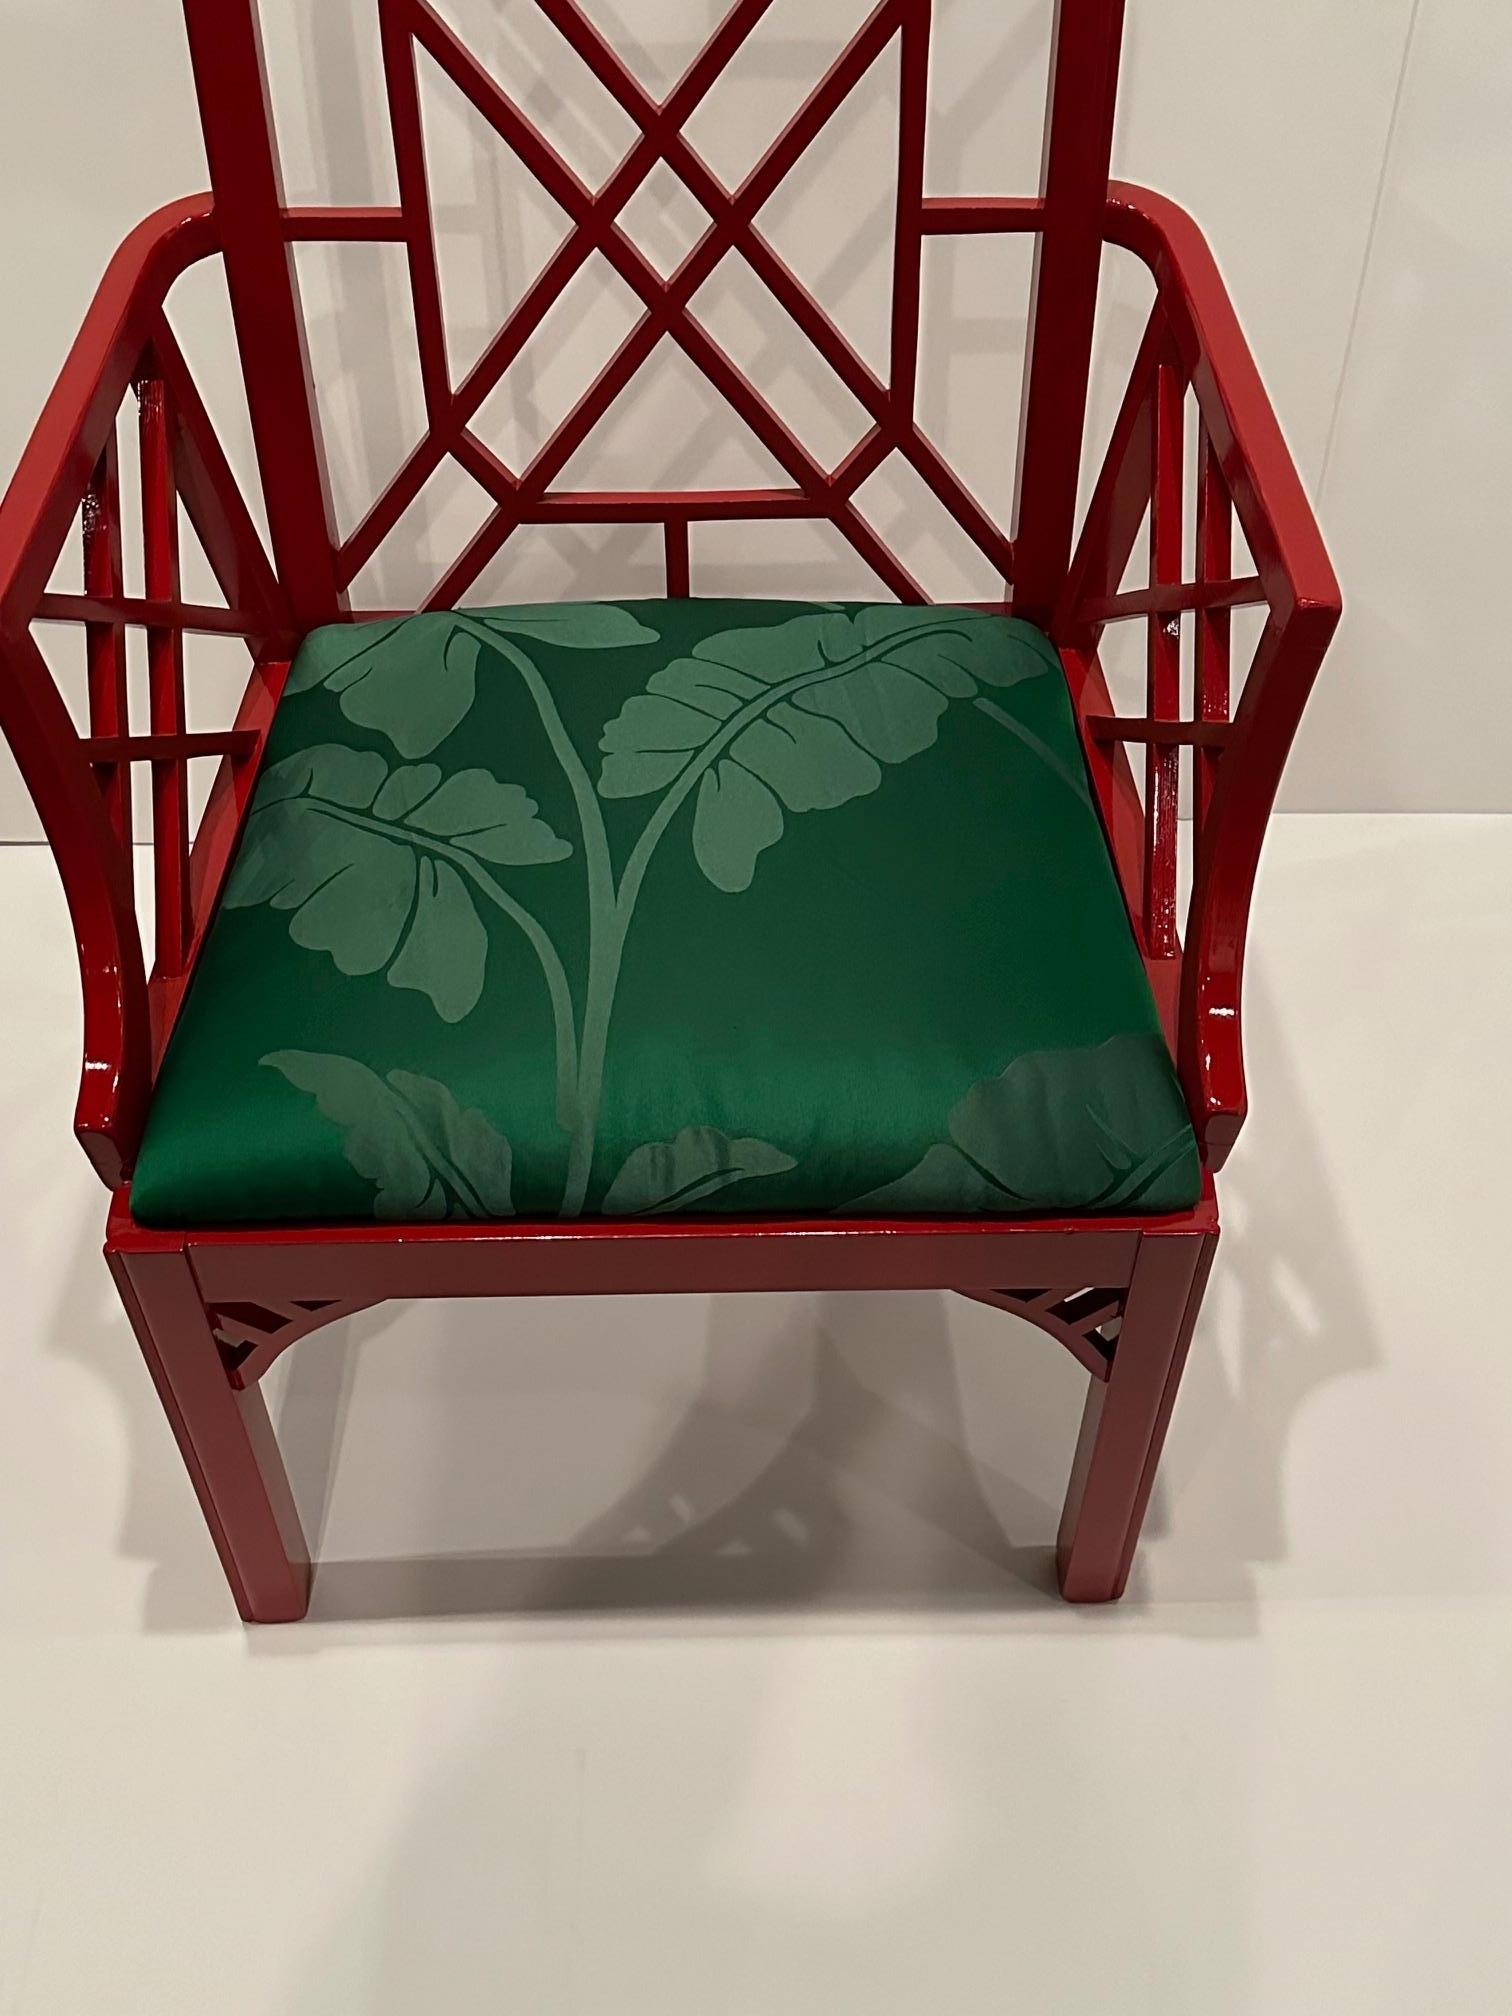 Glamorous Chinese Chippendale style red lacquer armchair having contrasting green silk seat upholstery with palm tree motif.
Arm height 27.5